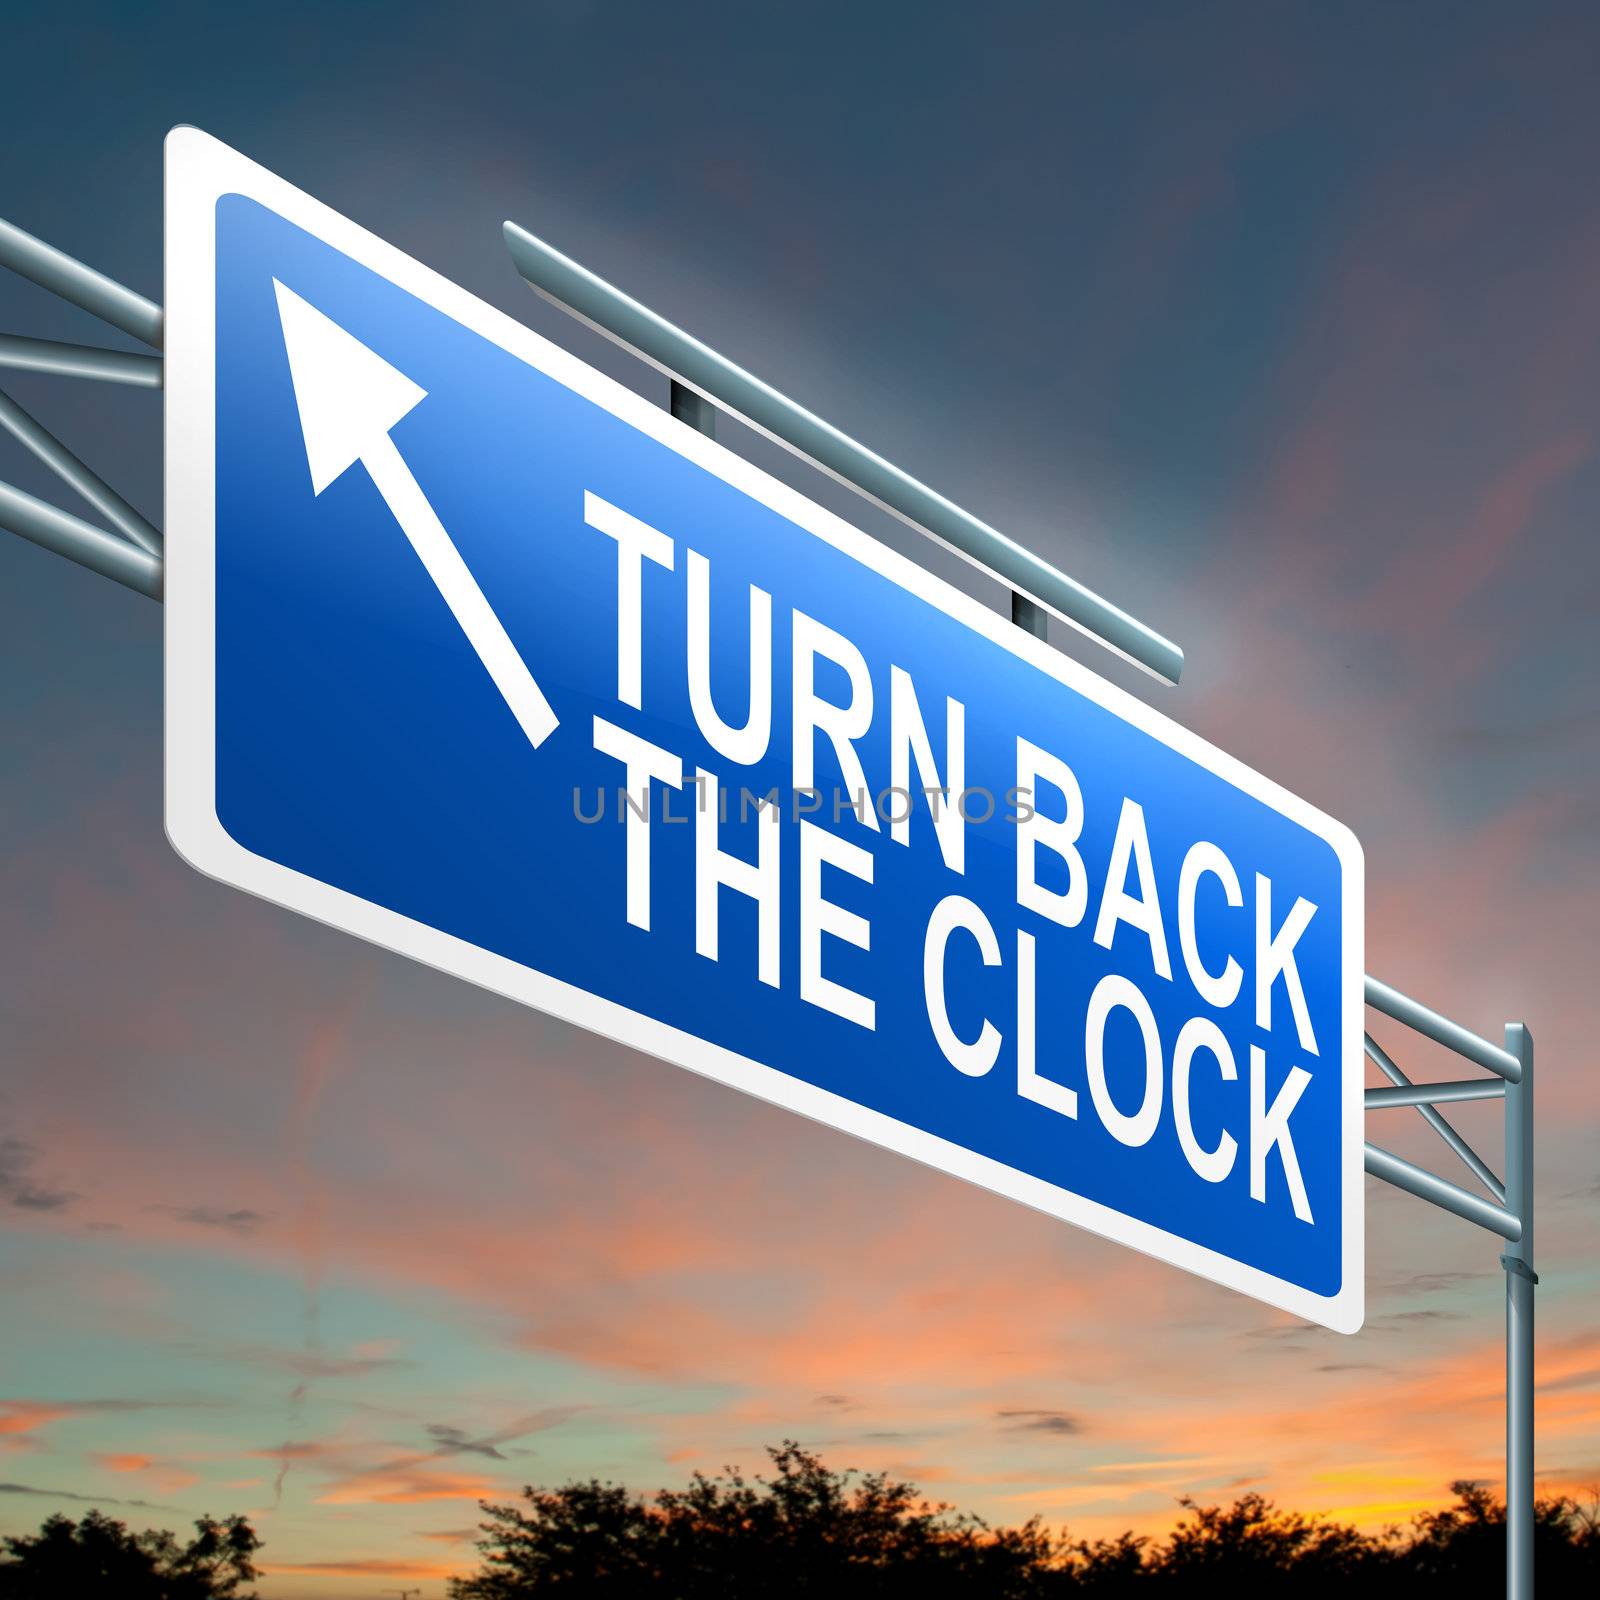 Illustration depicting an illuminated roadsign with a turn back the clock concept. Dark sunset sky background.